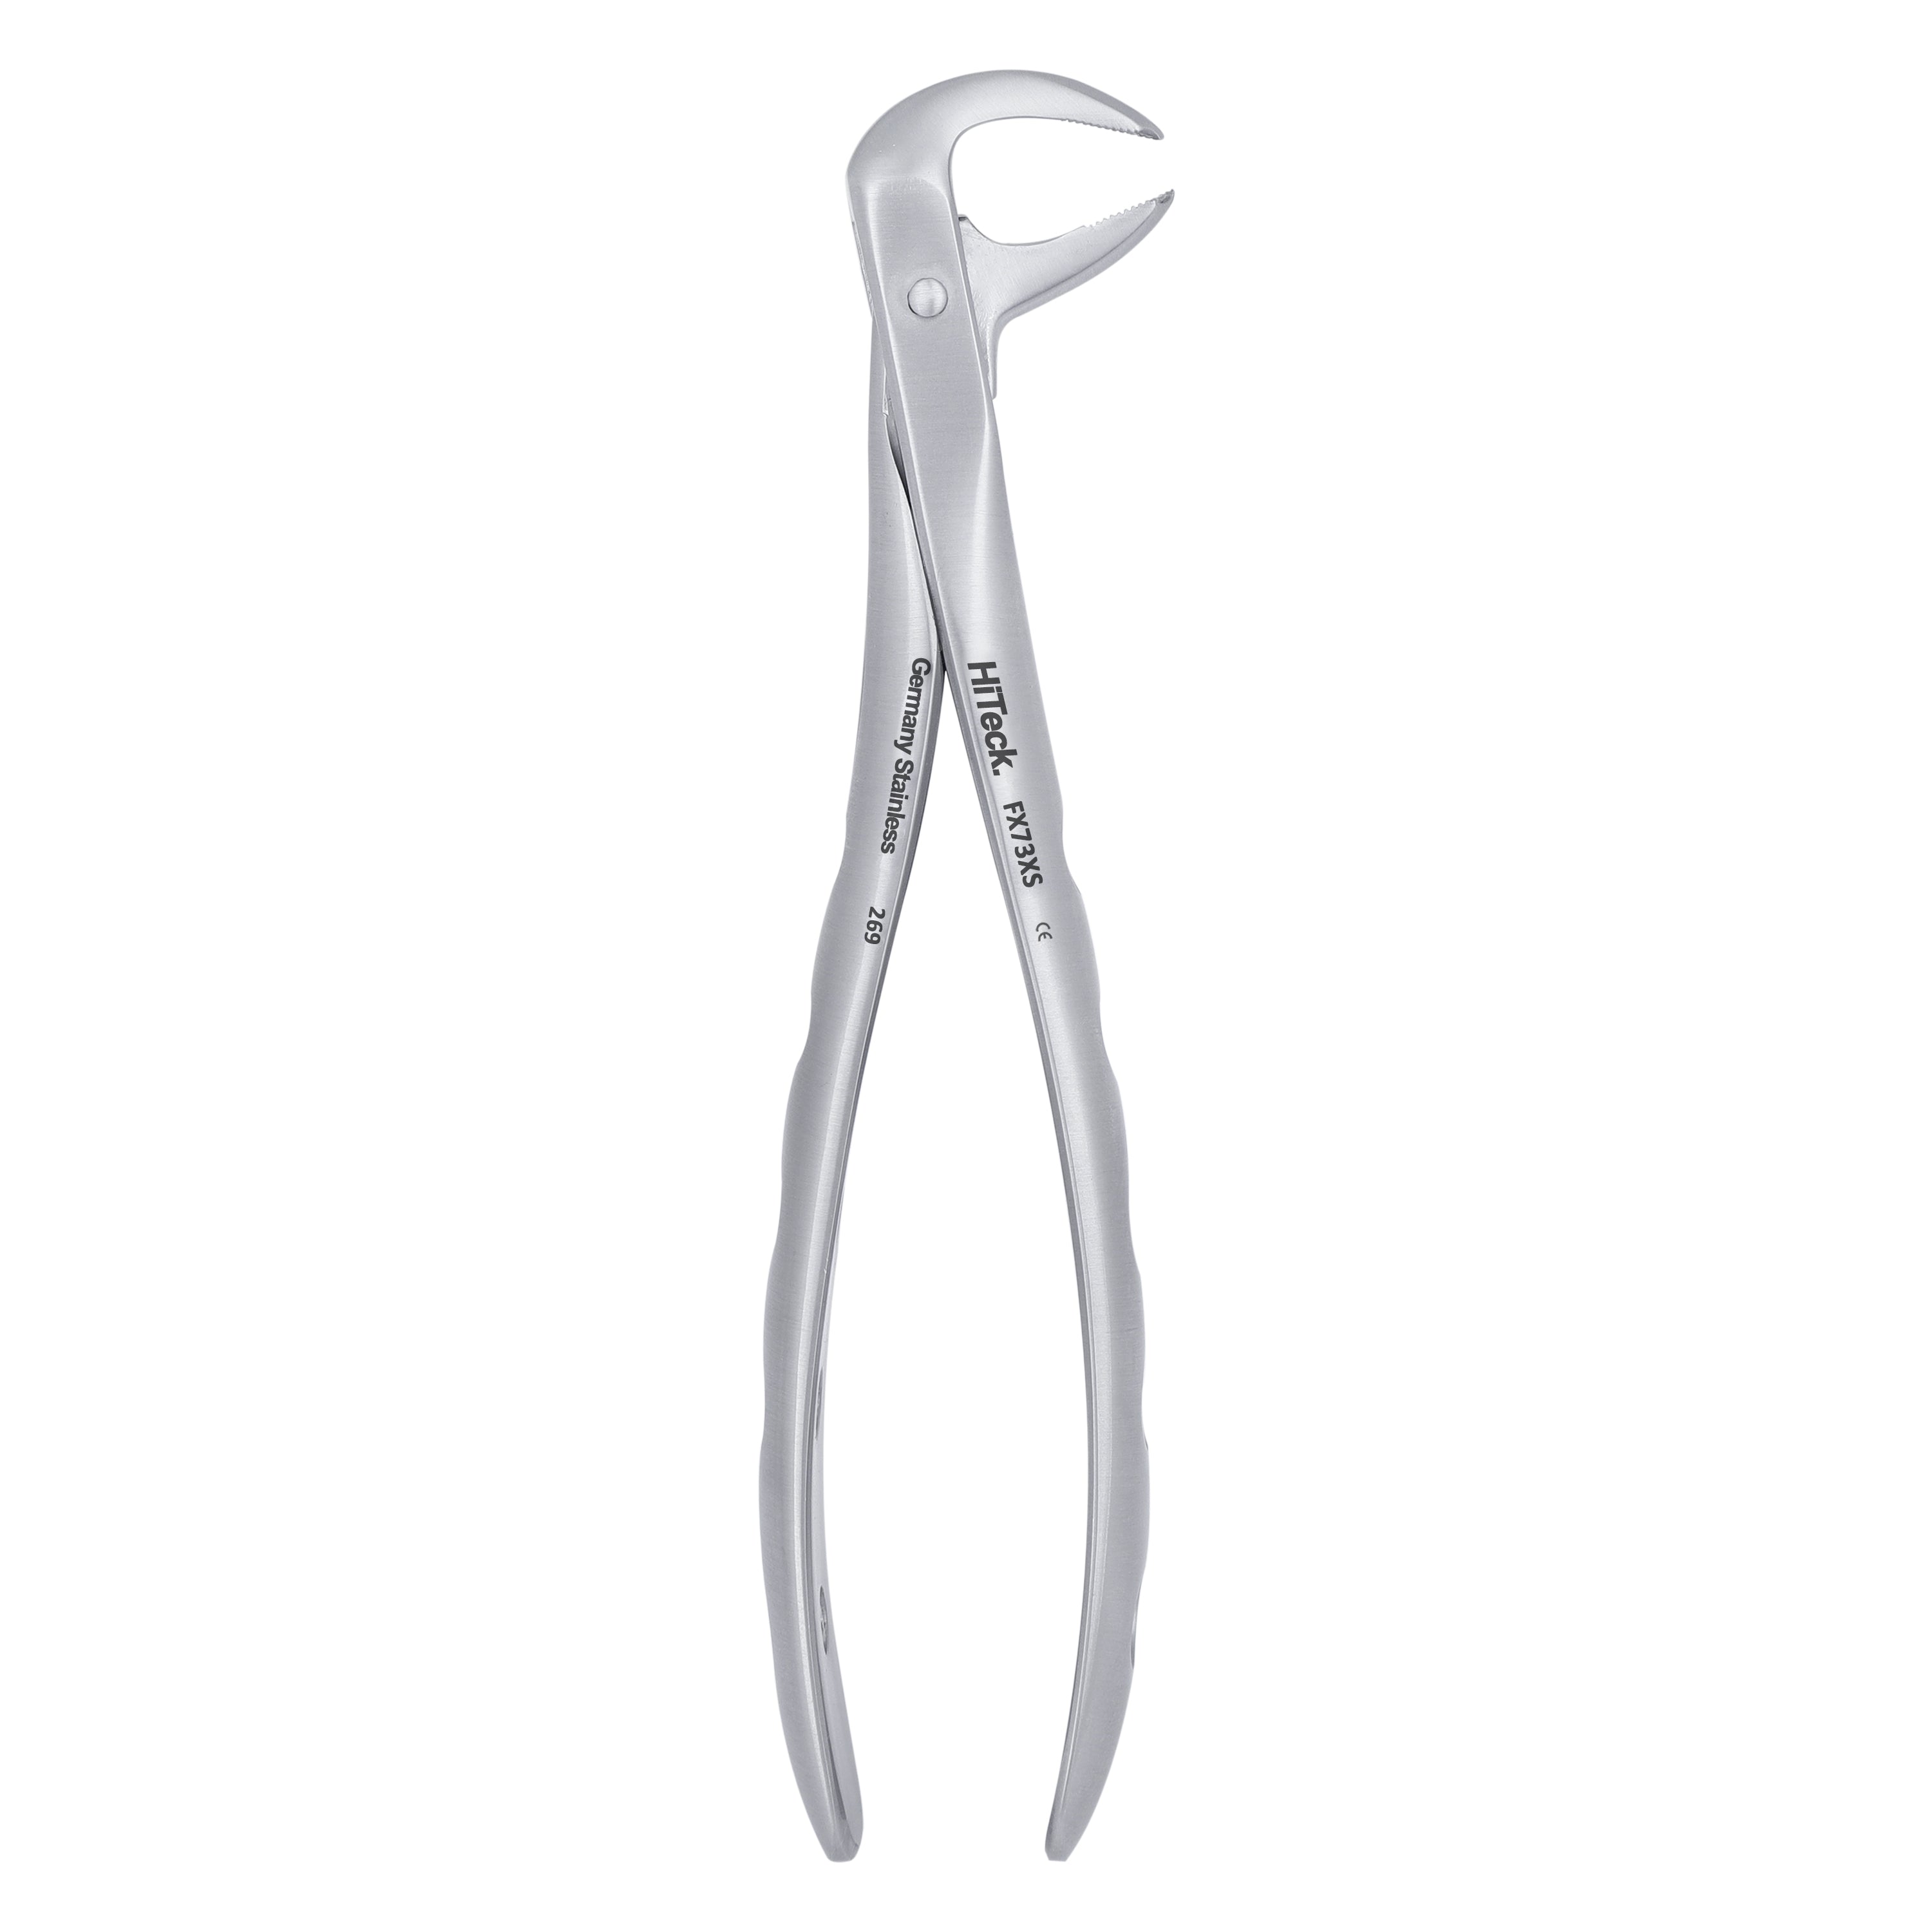 73 Lower Molars Atraumair Extraction Forceps - HiTeck Medical Instruments